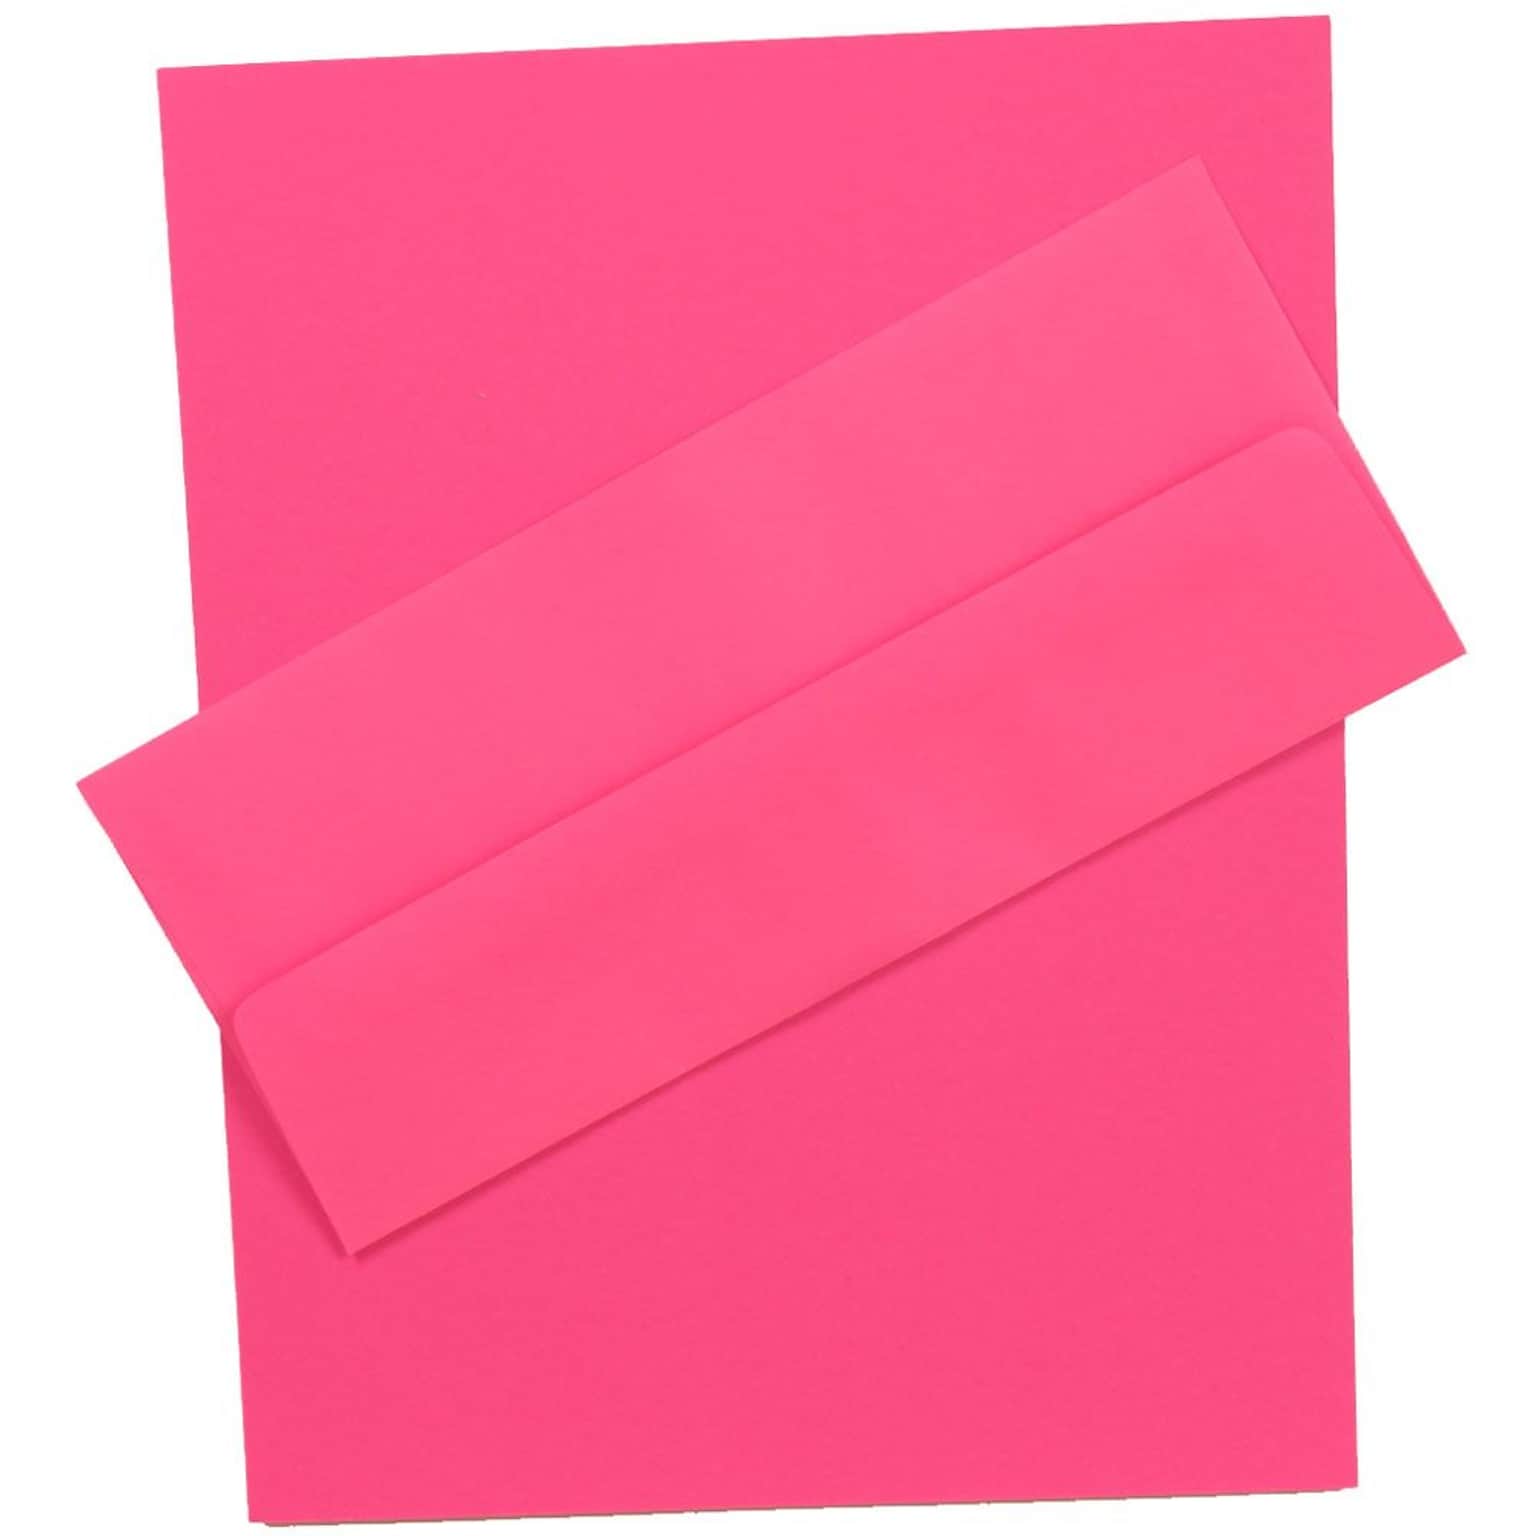 JAM Paper® Business Stationery Set, 100 Sheets of Paper and 100 #10 Envelopes, Brite Hue Ultra Fuchsia Pink, 100/set (303024420)